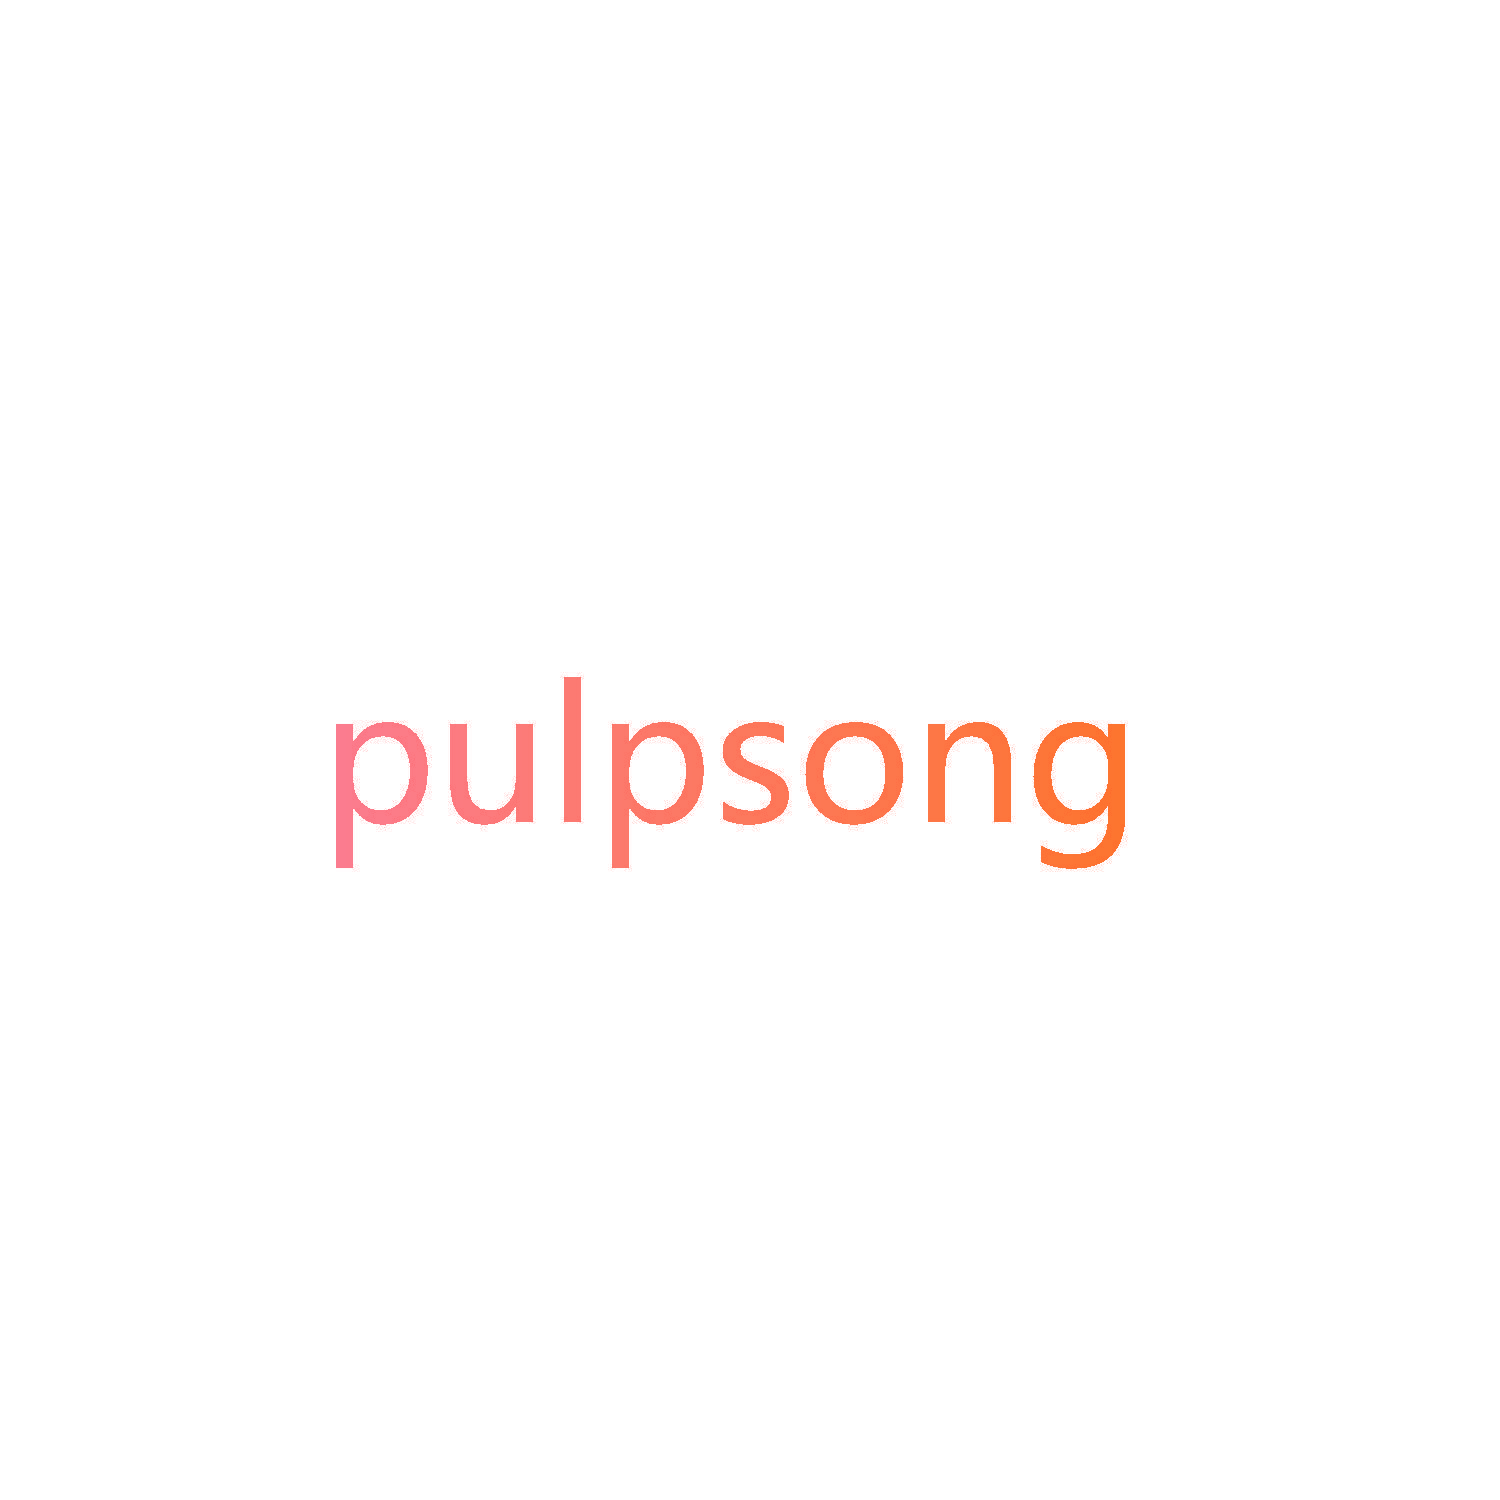 pulpsong